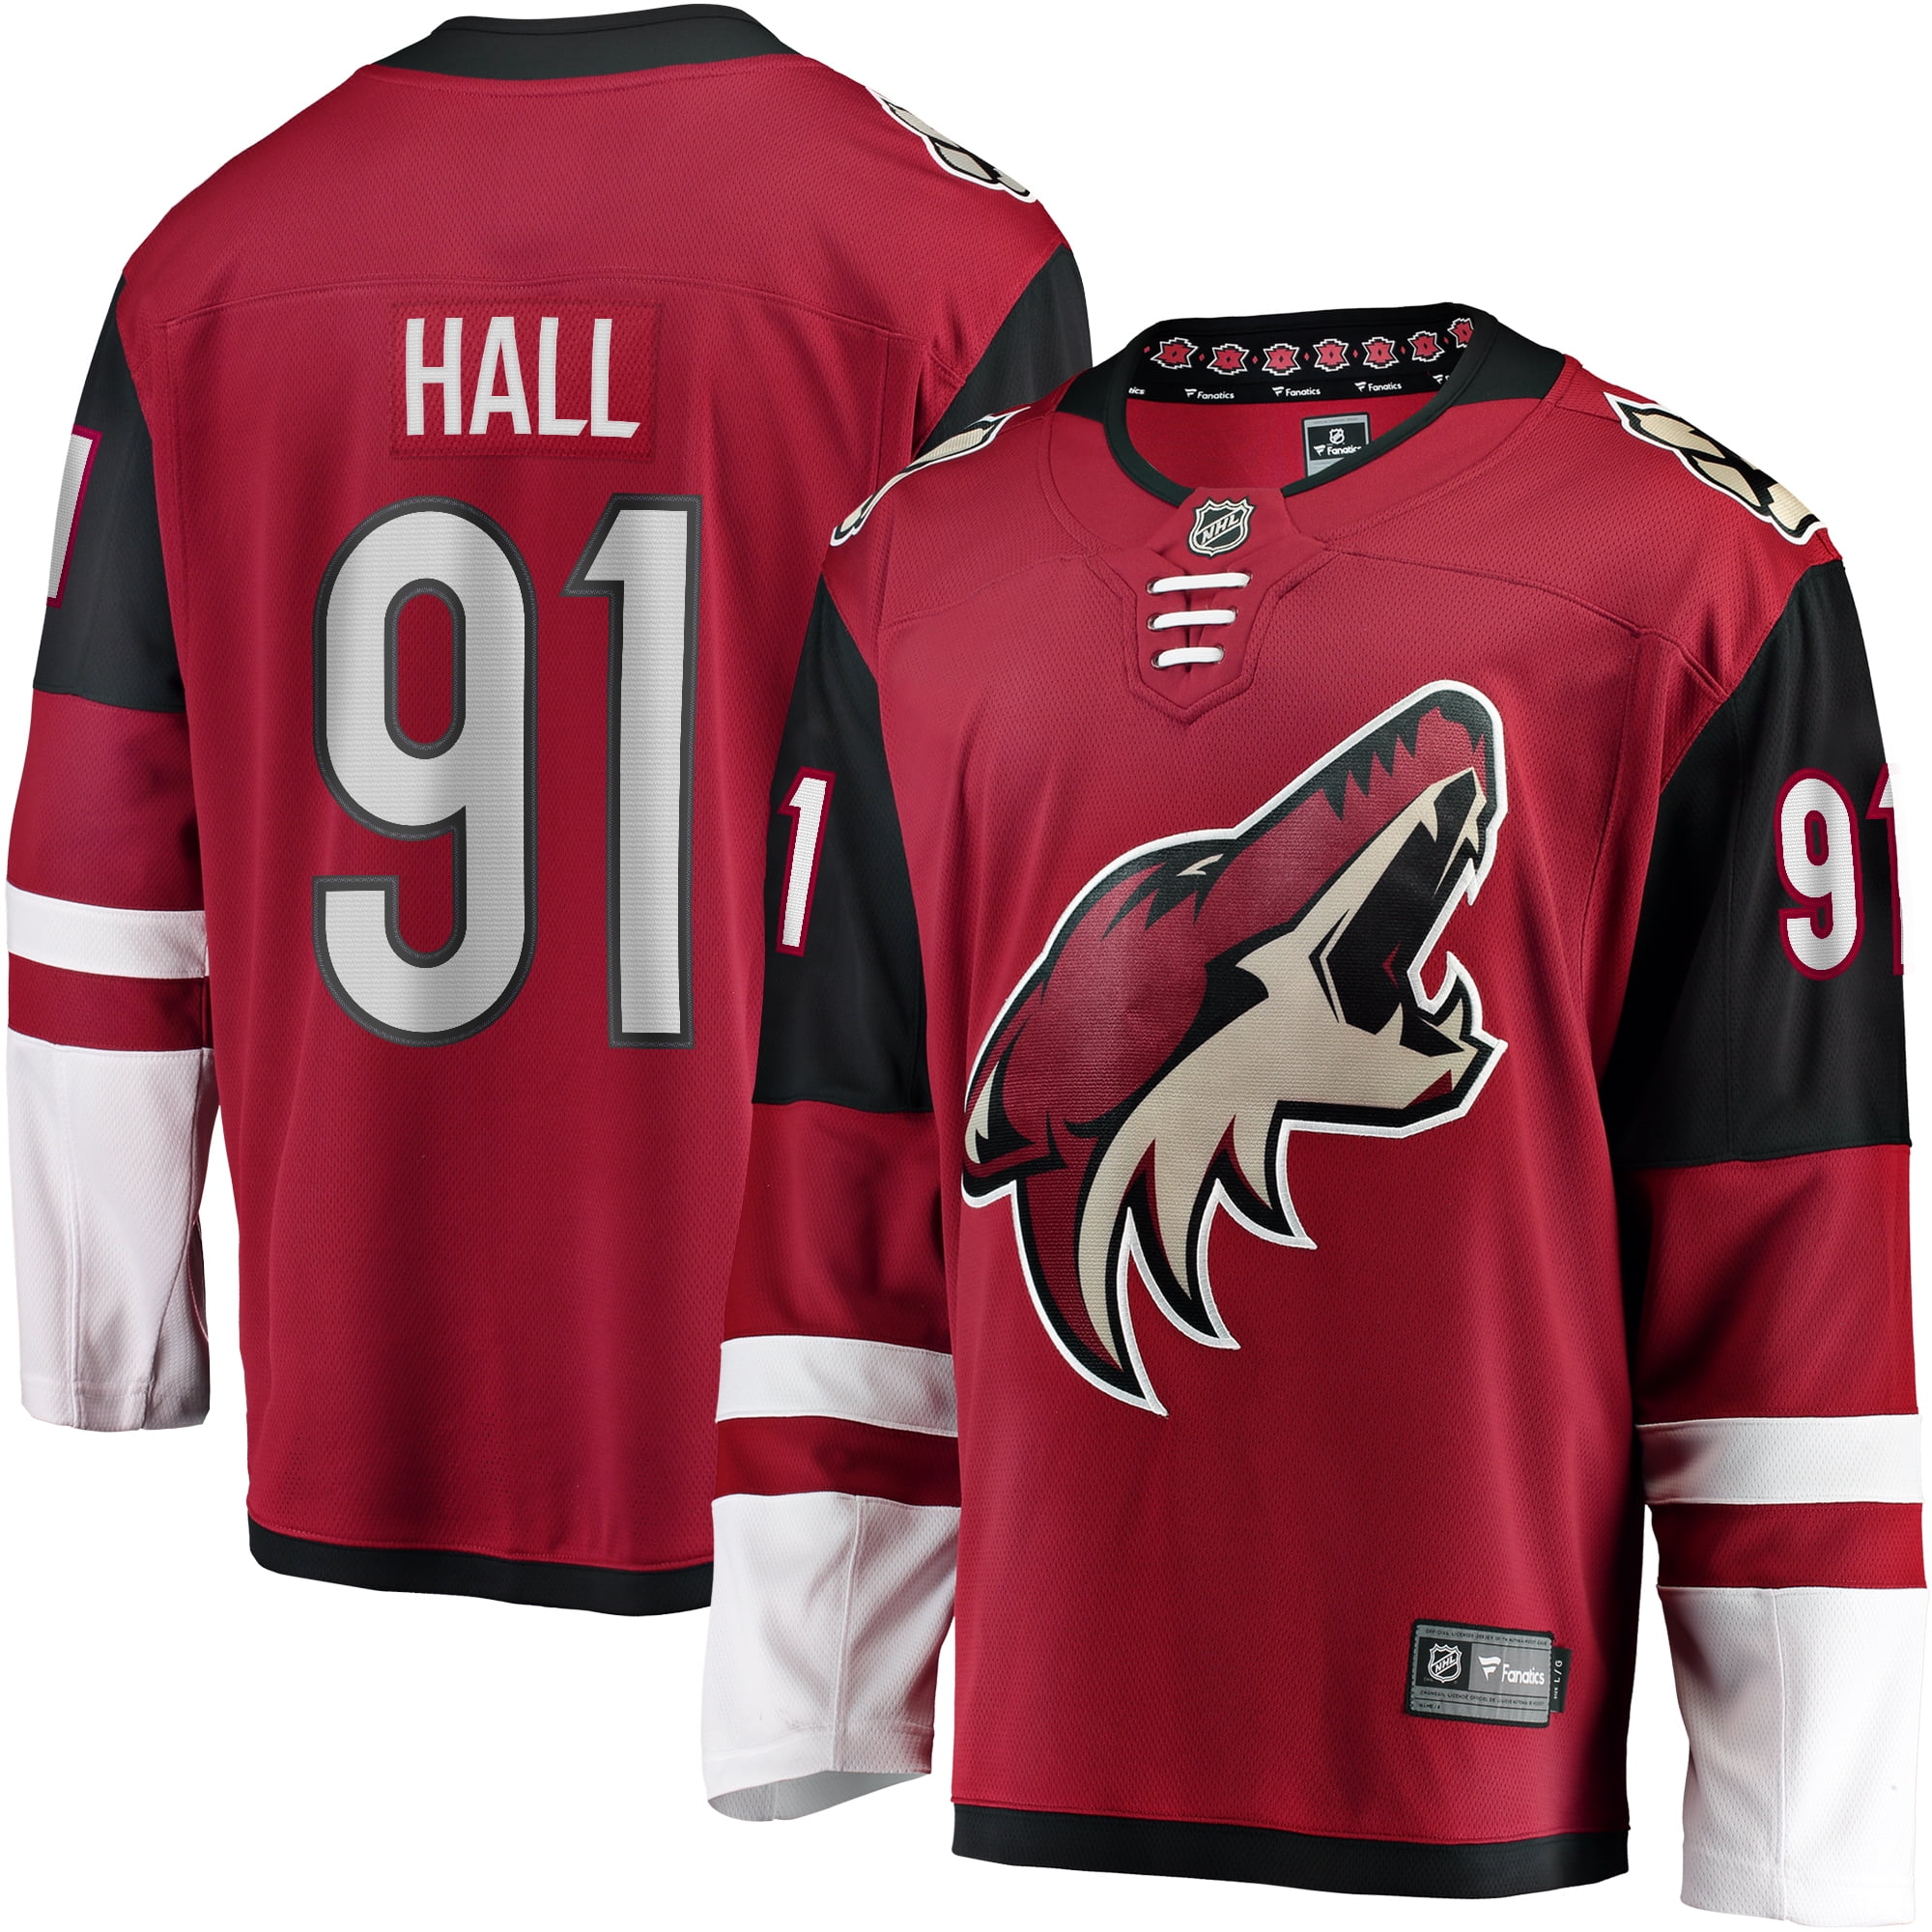 taylor hall youth jersey